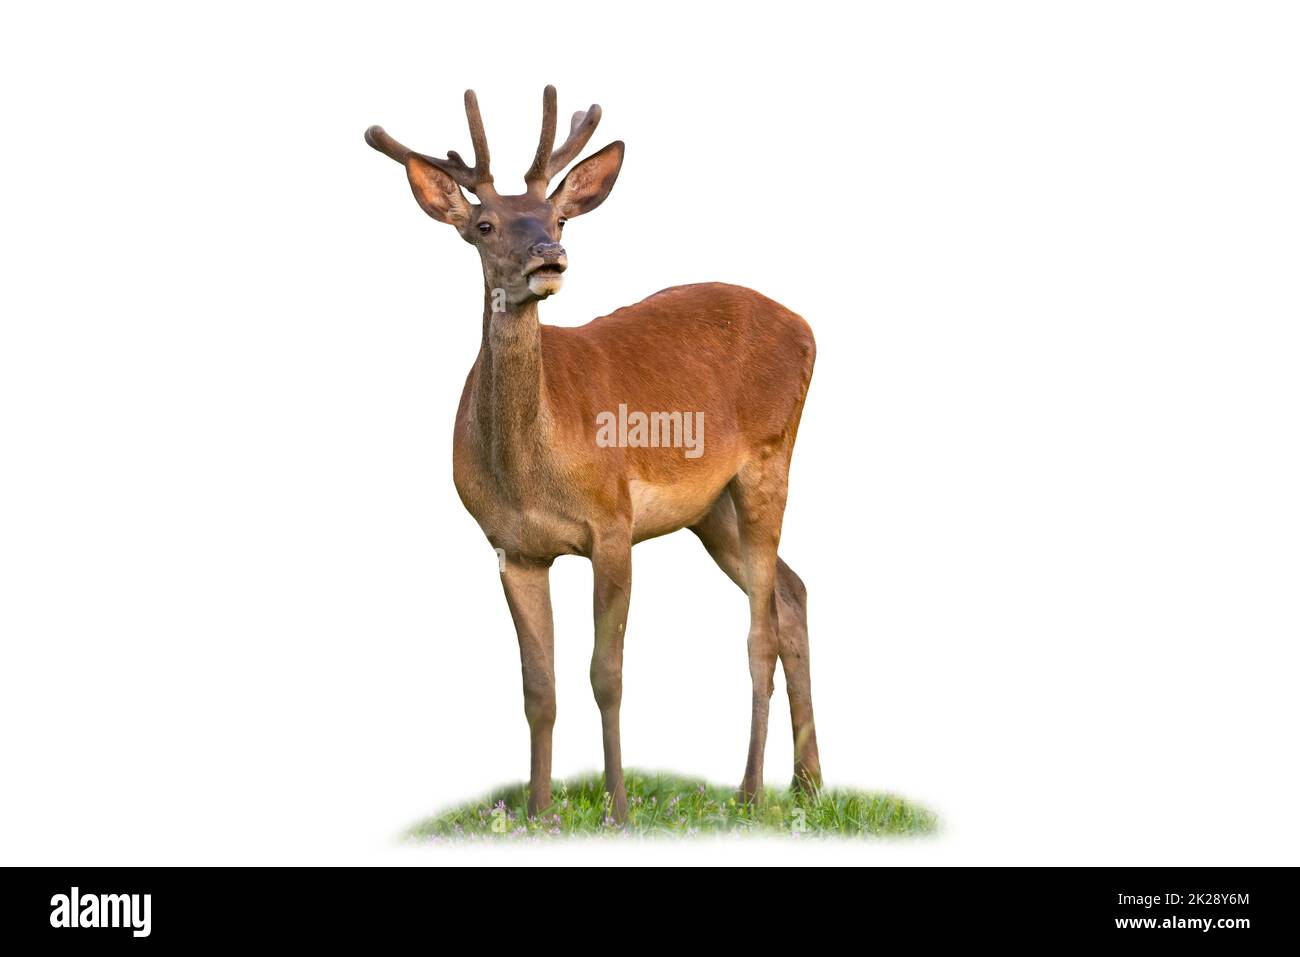 Curious red deer standing on grass isolated on white background Stock Photo